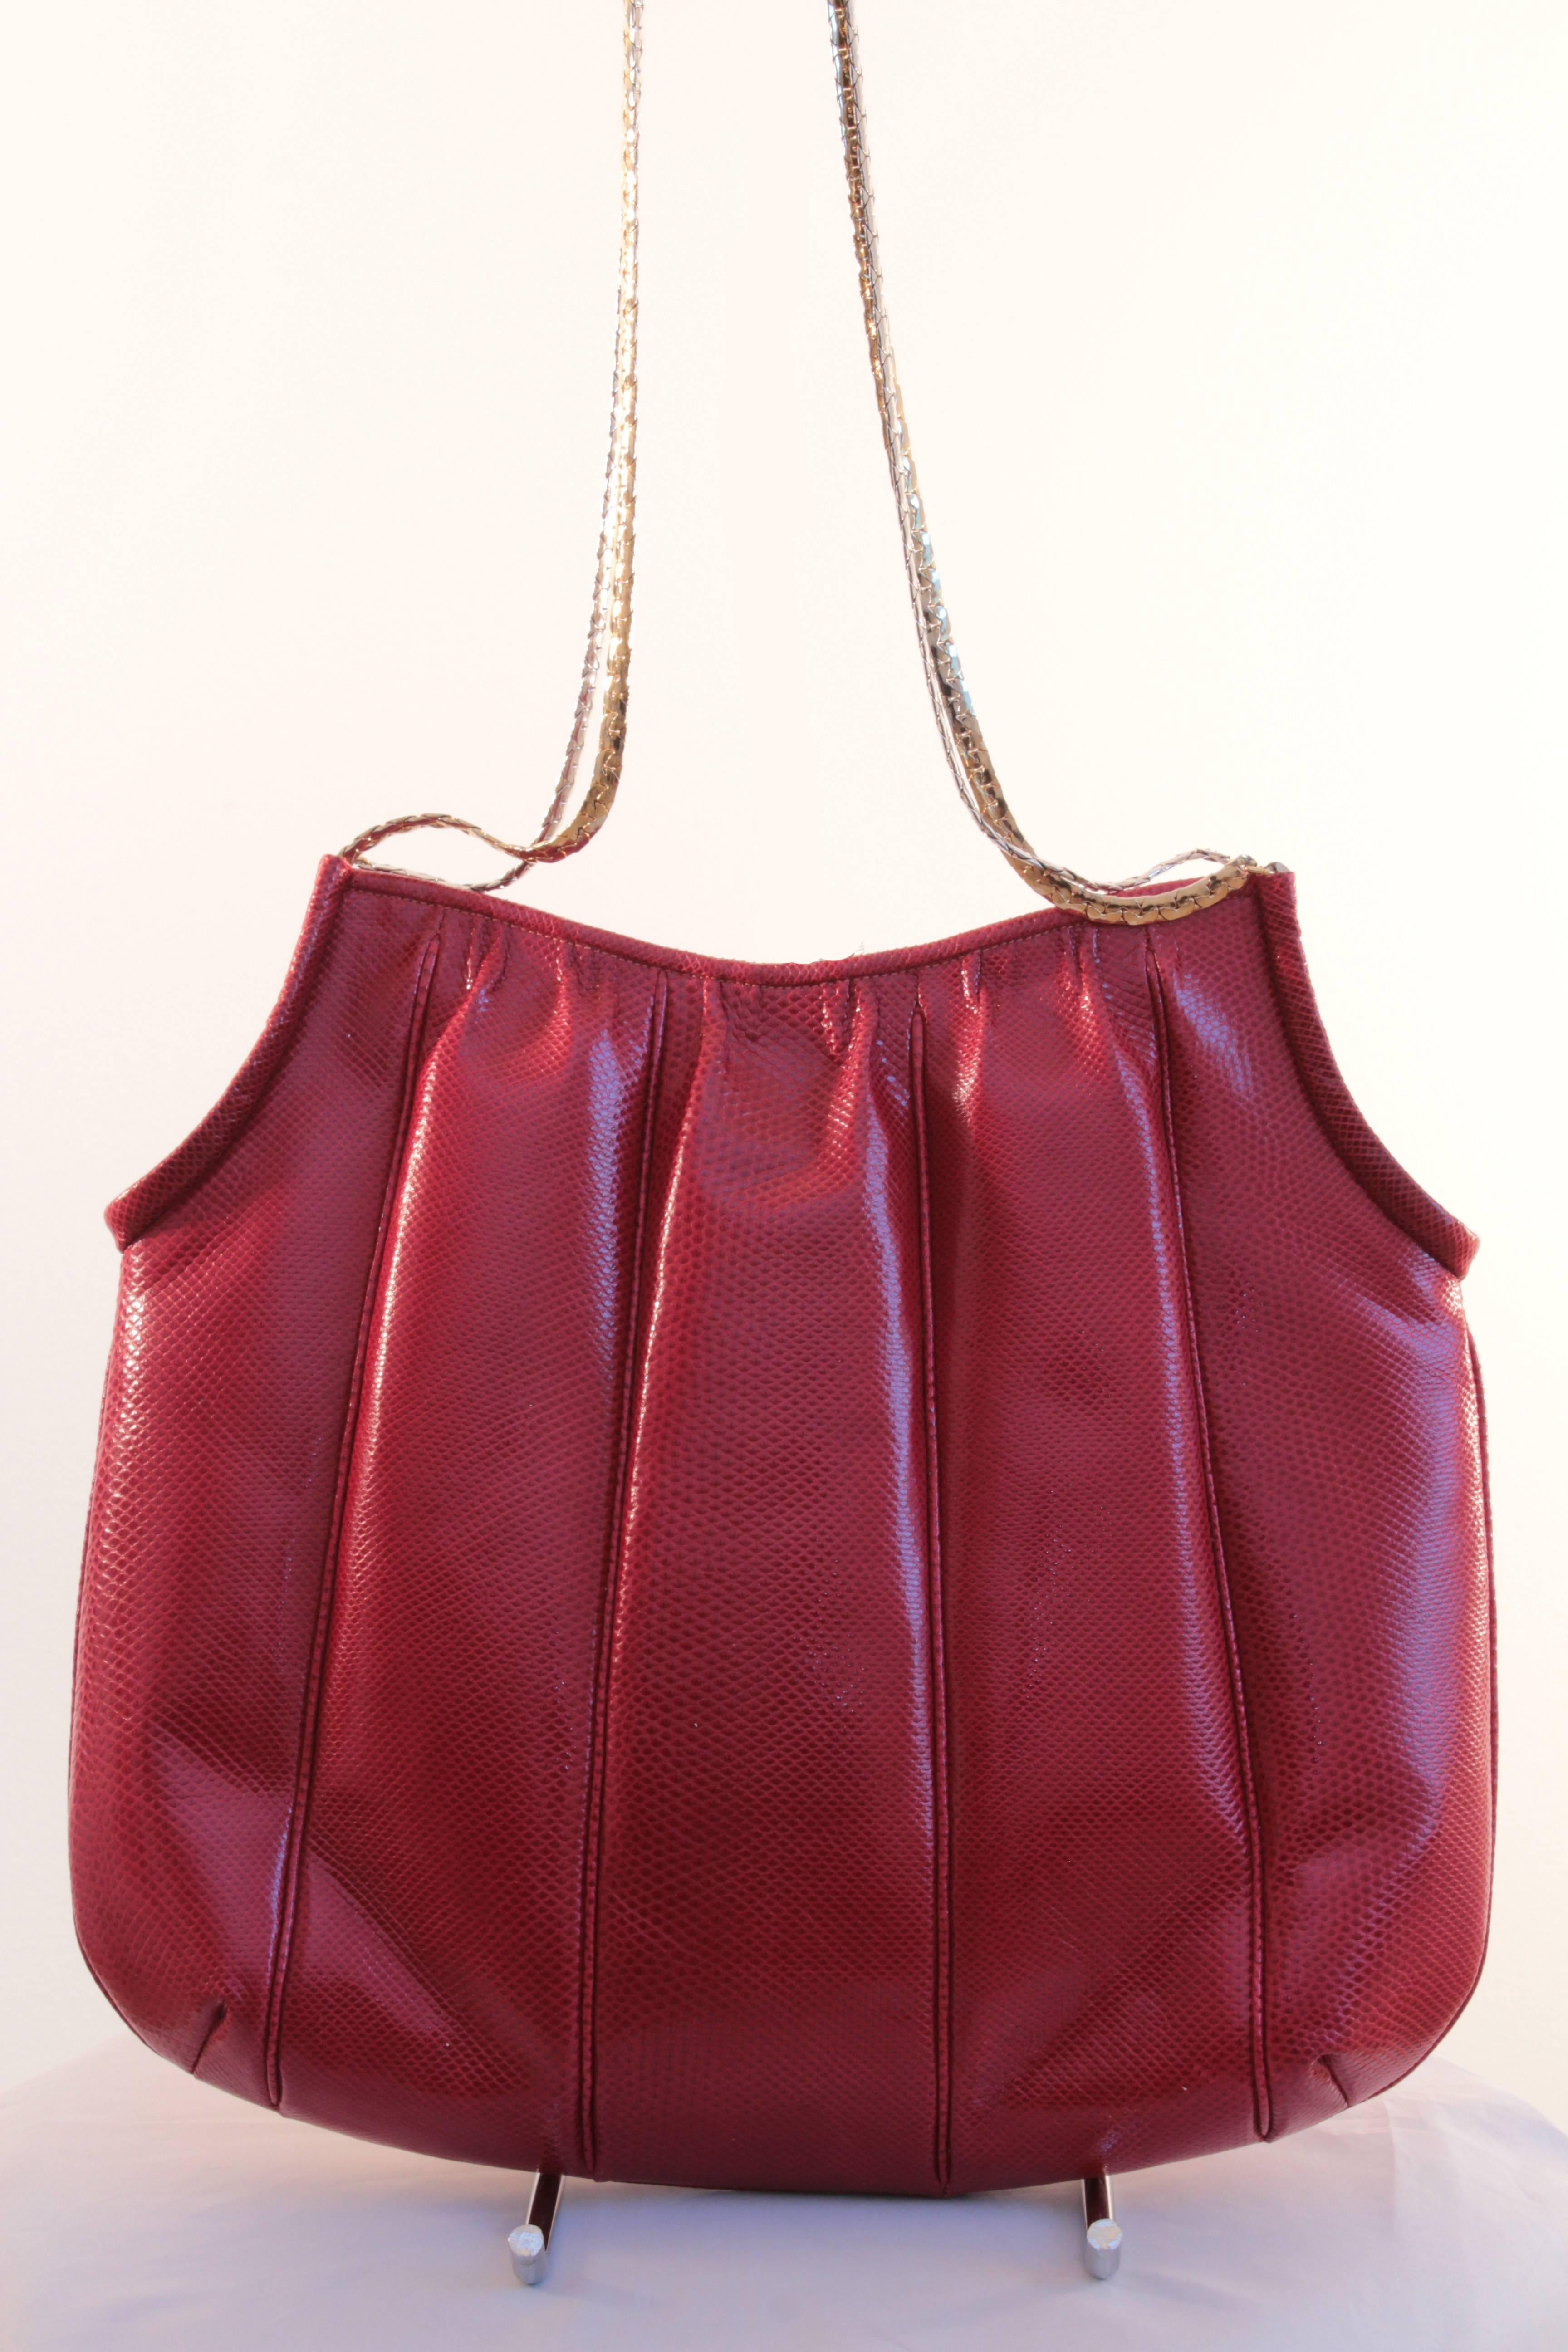 This fabulous red Karung or water snake bag was made by Finesse La Model, likely in the 1980s. It features hidden magnetic closures and two tone chain shoulder straps, gold and silver.  Comes with a silver make up mirror, which fits nicely in the